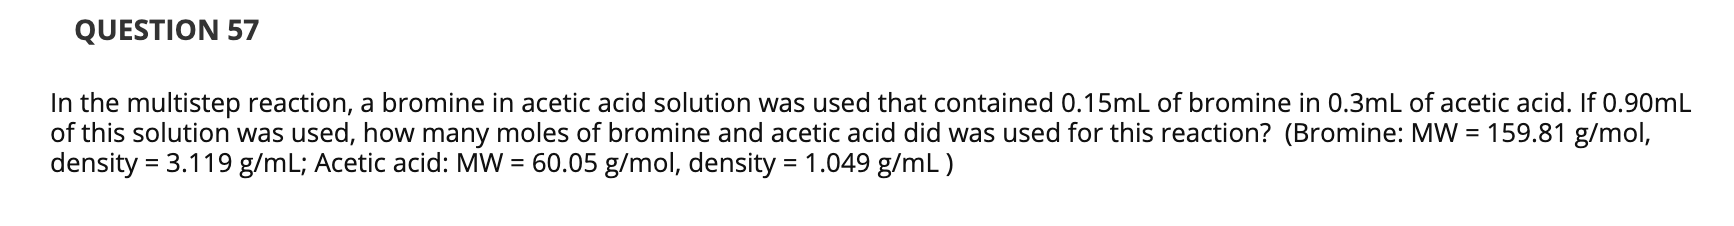 In the multistep reaction, a bromine in acetic acid solution was used that contained 0.15mL of bromine in 0.3mL of acetic acid. If 0.90mL
of this solution was used, how many moles of bromine and acetic acid did was used for this reaction? (Bromine: MW = 159.81 g/mol,
density = 3.119 g/mL; Acetic acid: MW = 60.05 g/mol, density = 1.049 g/mL )
%3D
